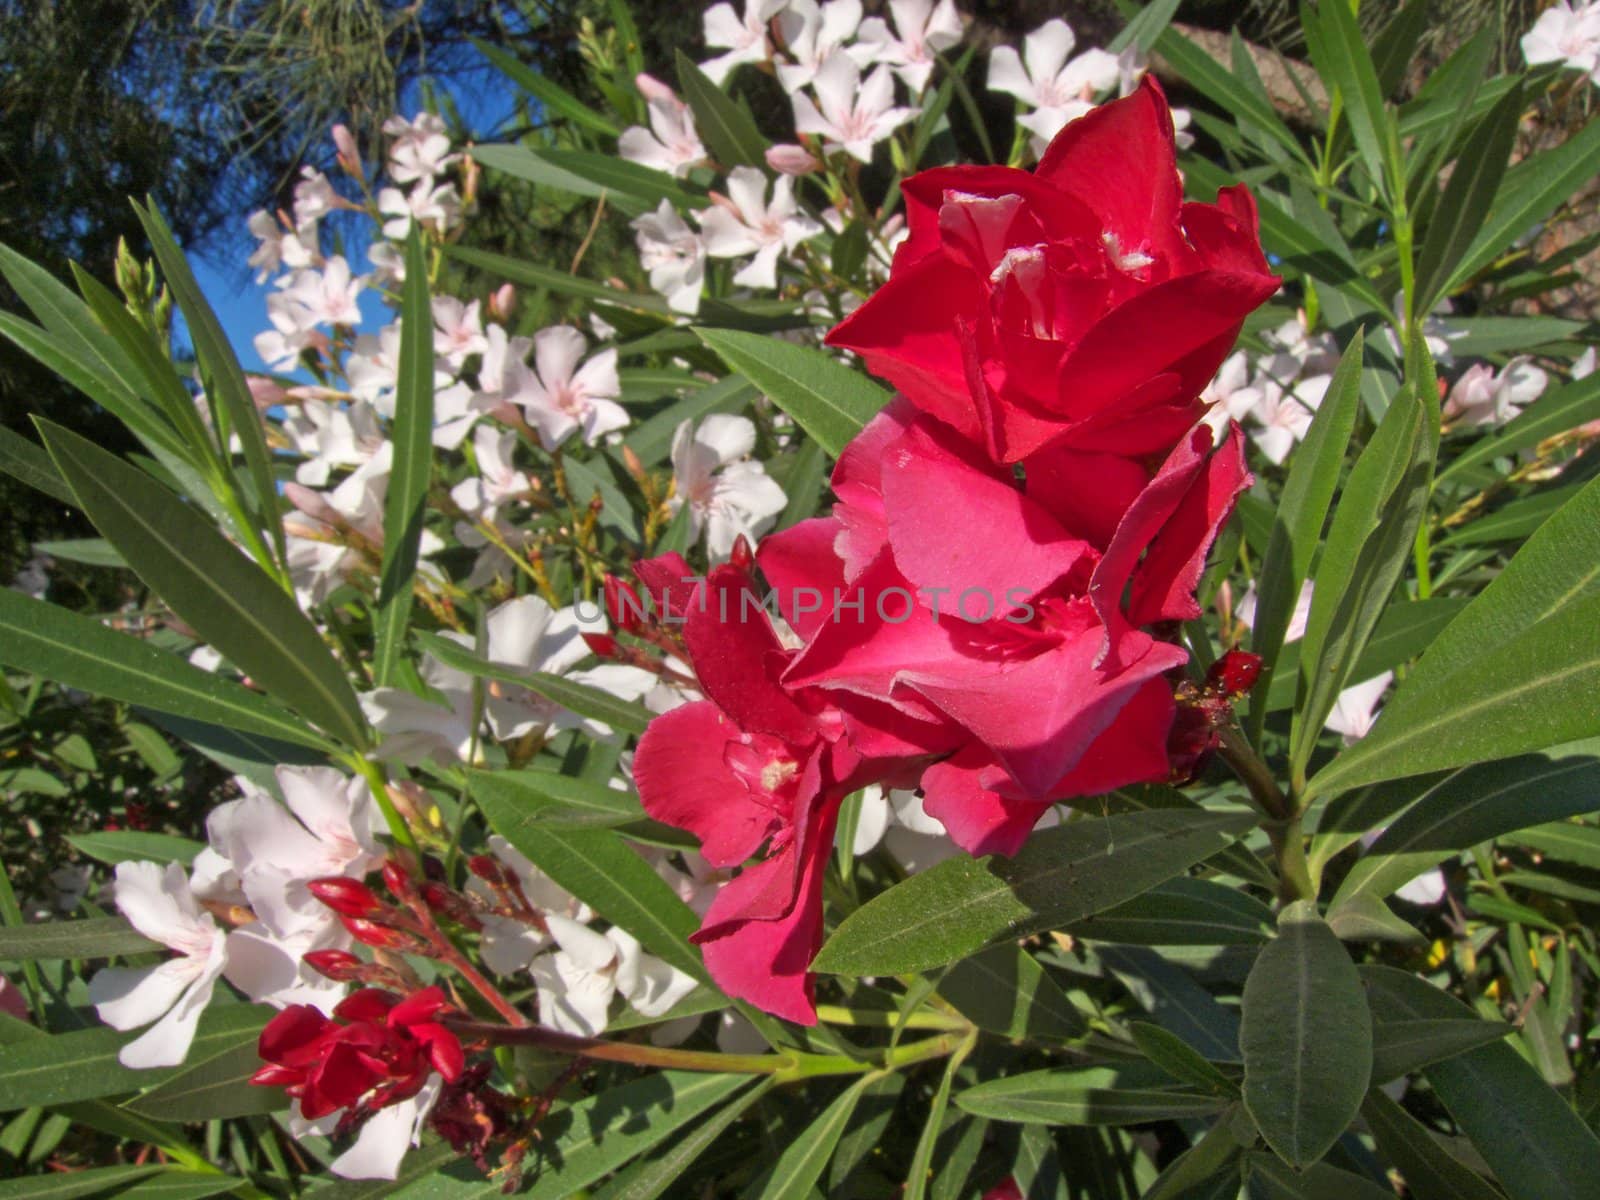 image showing some red and white oleander flowers